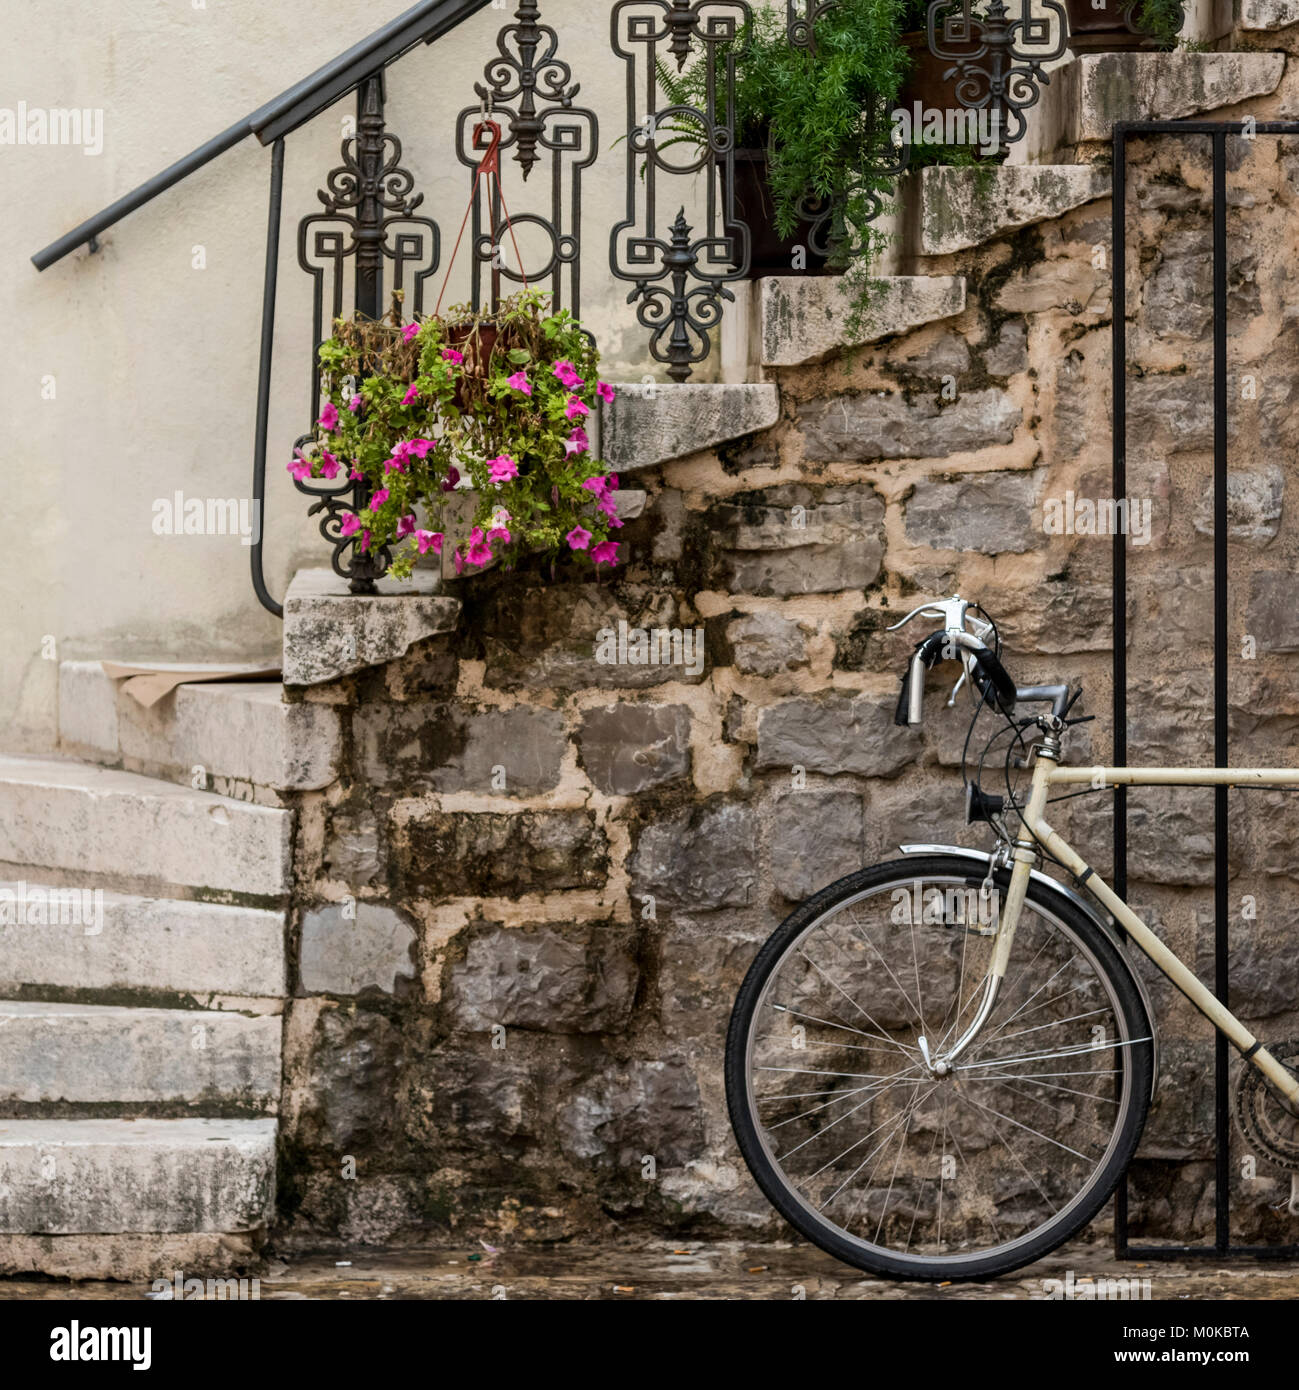 A bicycle parked beside a stone wall with steps leading up and plants decorating the railing; Budva, Opstina Budva, Montenegro Stock Photo